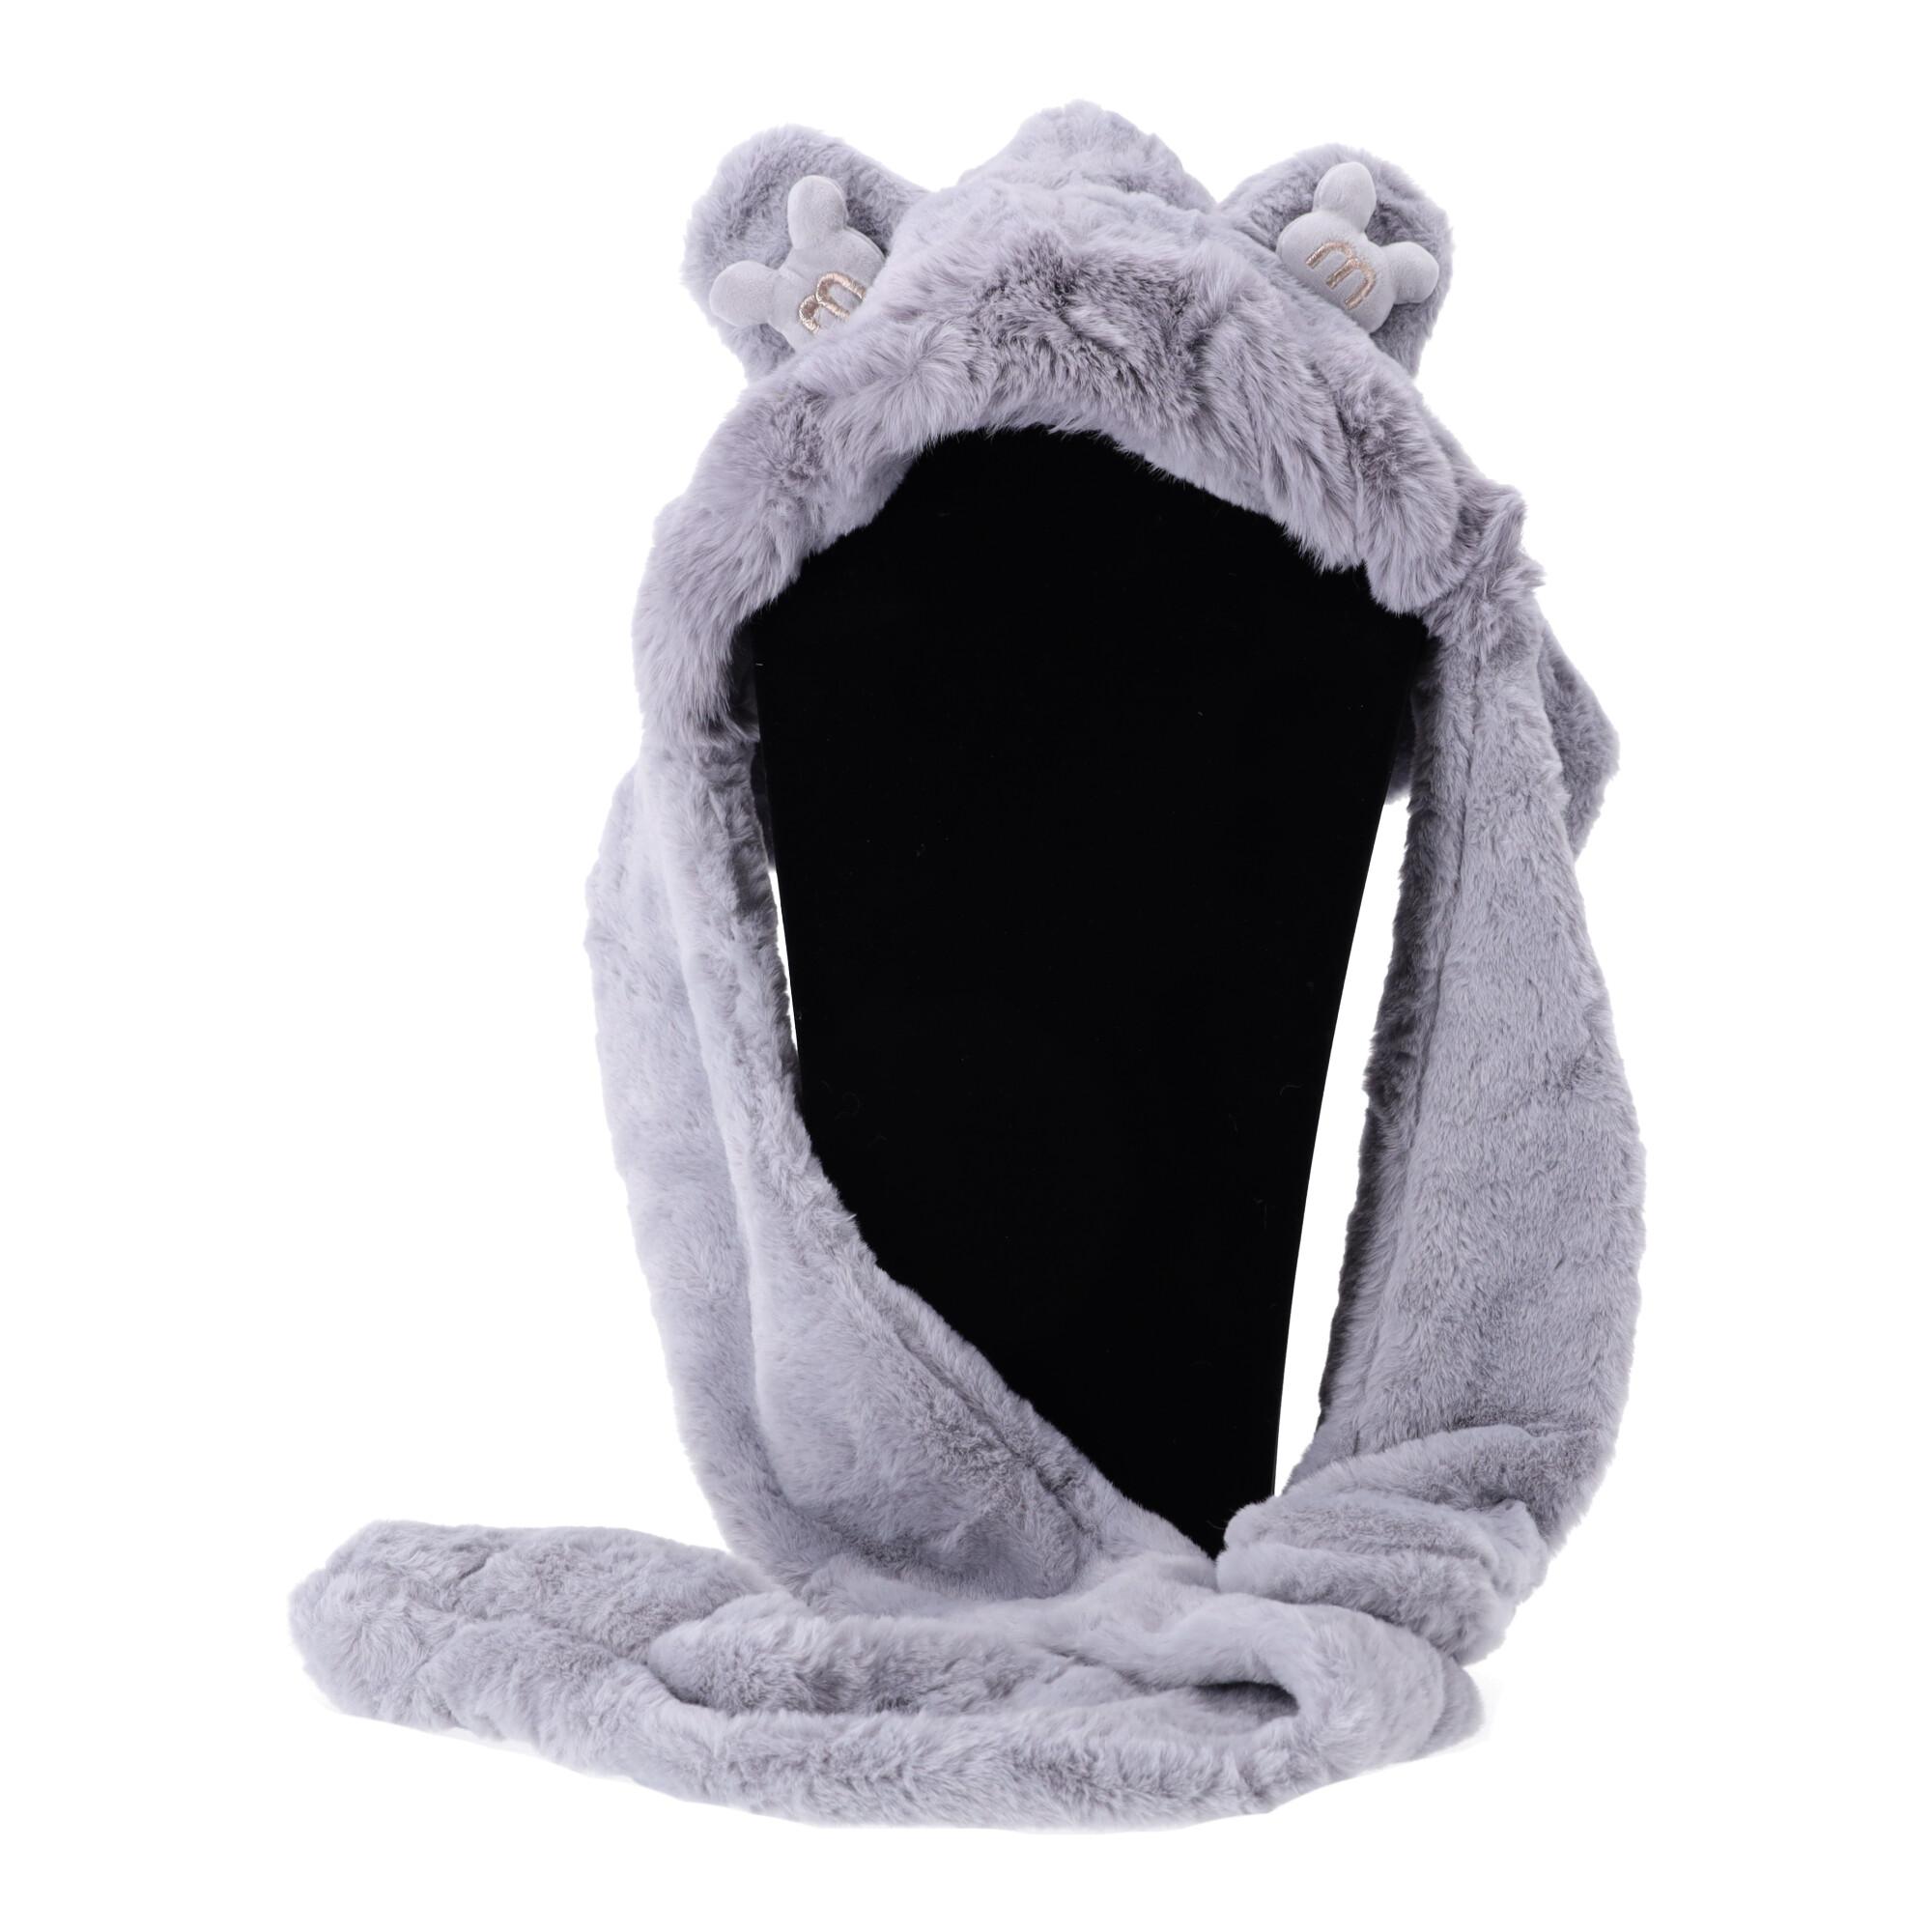 Children's plush hat with a scarf and 3in1 gloves for children from 2 to 12 years old - gray